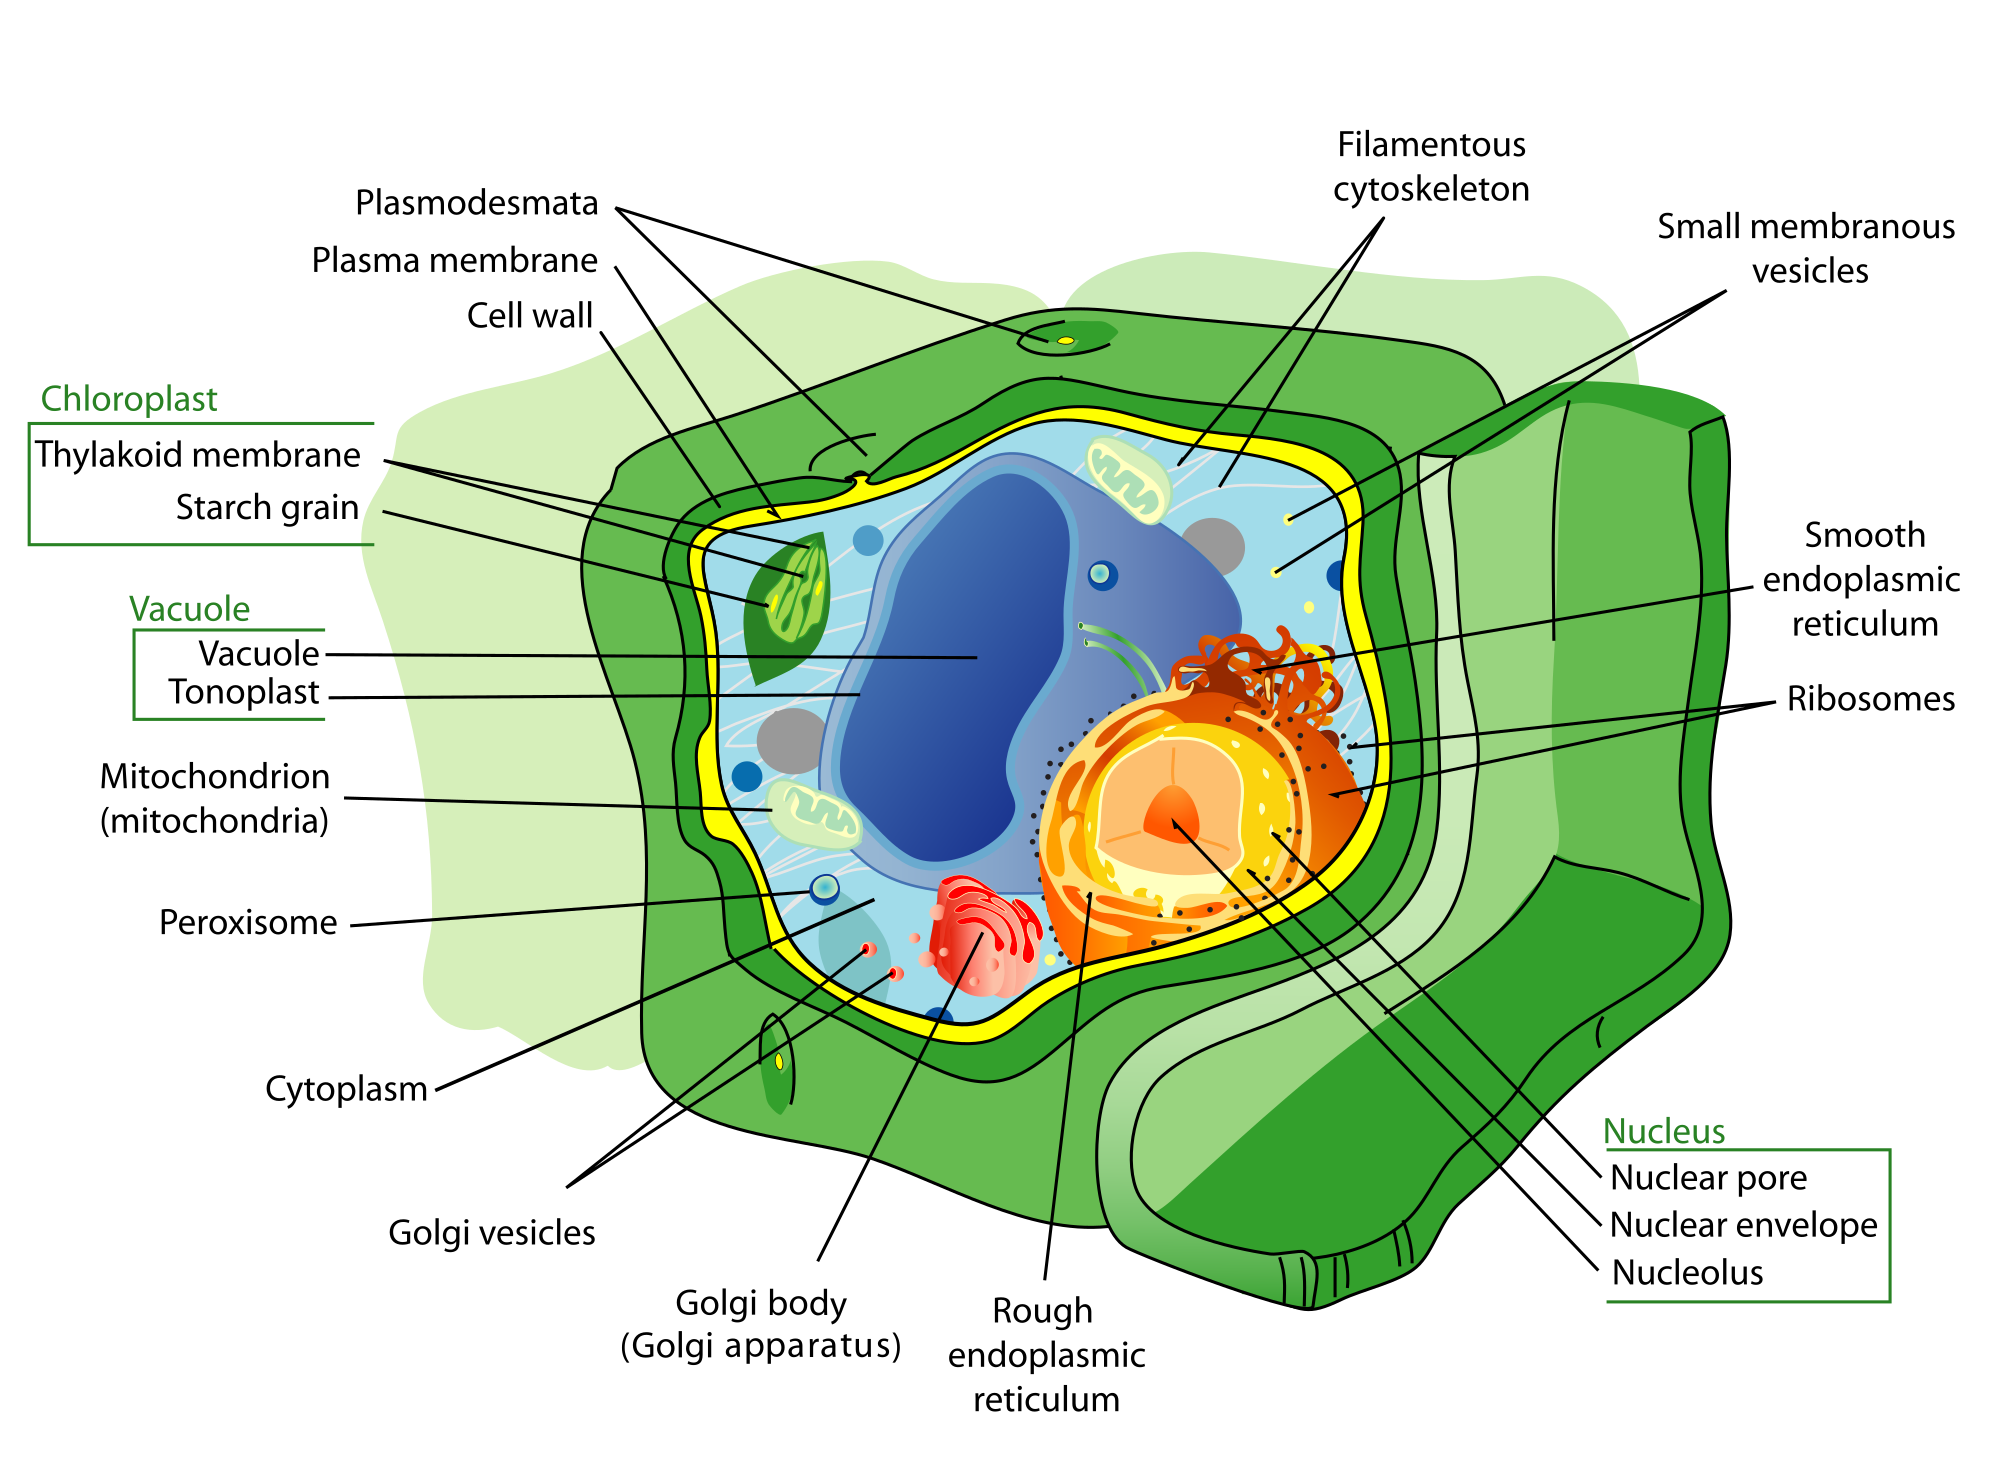 QUIZ: PLANT AND ANIMAL CELL